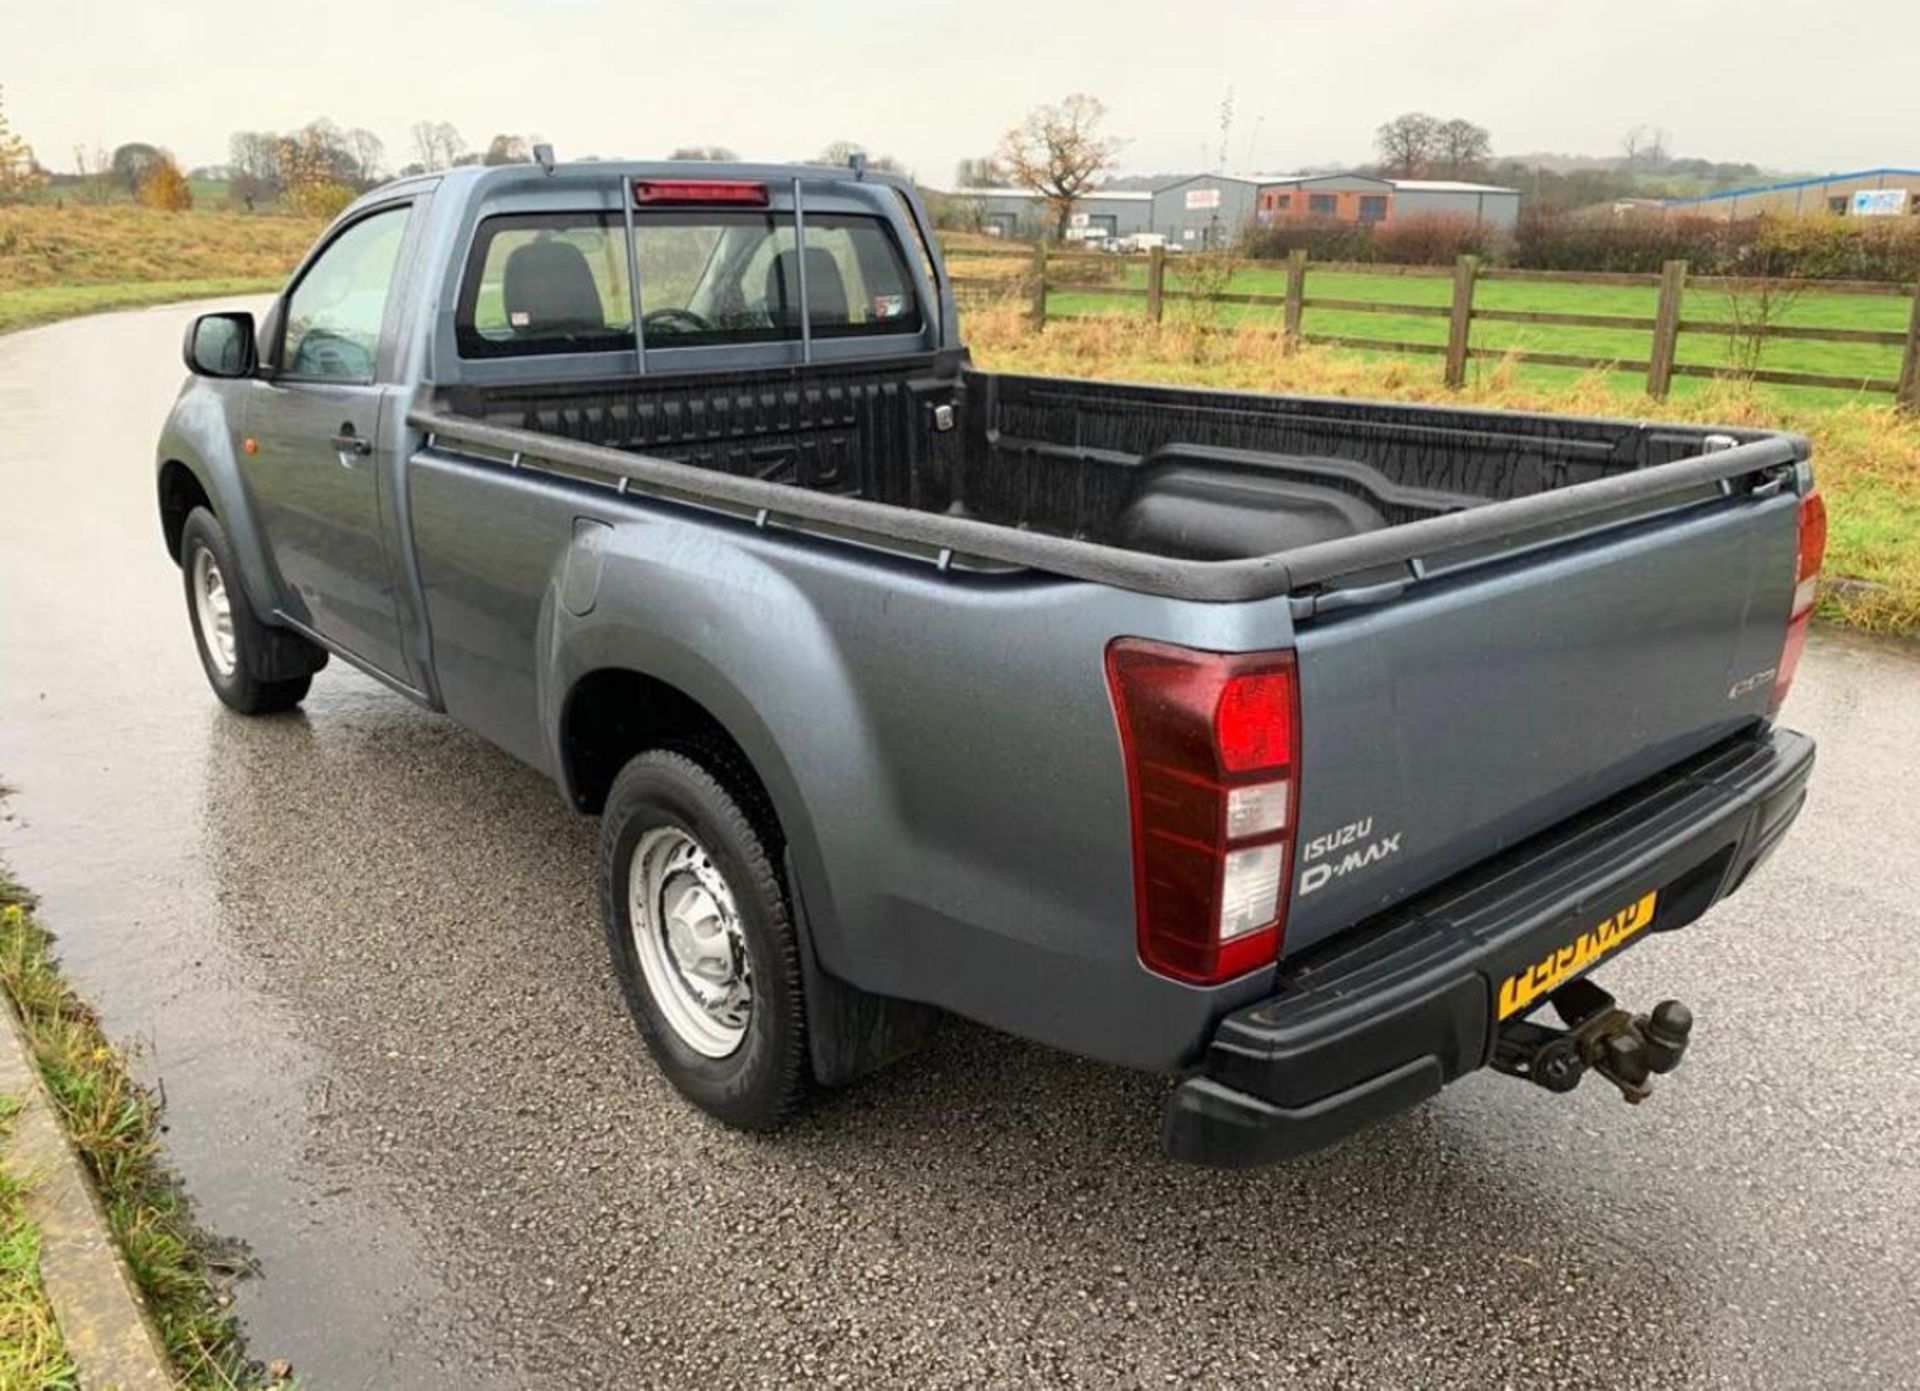 2015/15 REG ISUZU D-MAX S/C TWIN TURBO 4X4 TD 2.5 DIESEL PICK-UP, SHOWING 0 FORMER KEEPERS *NO VAT* - Image 3 of 10